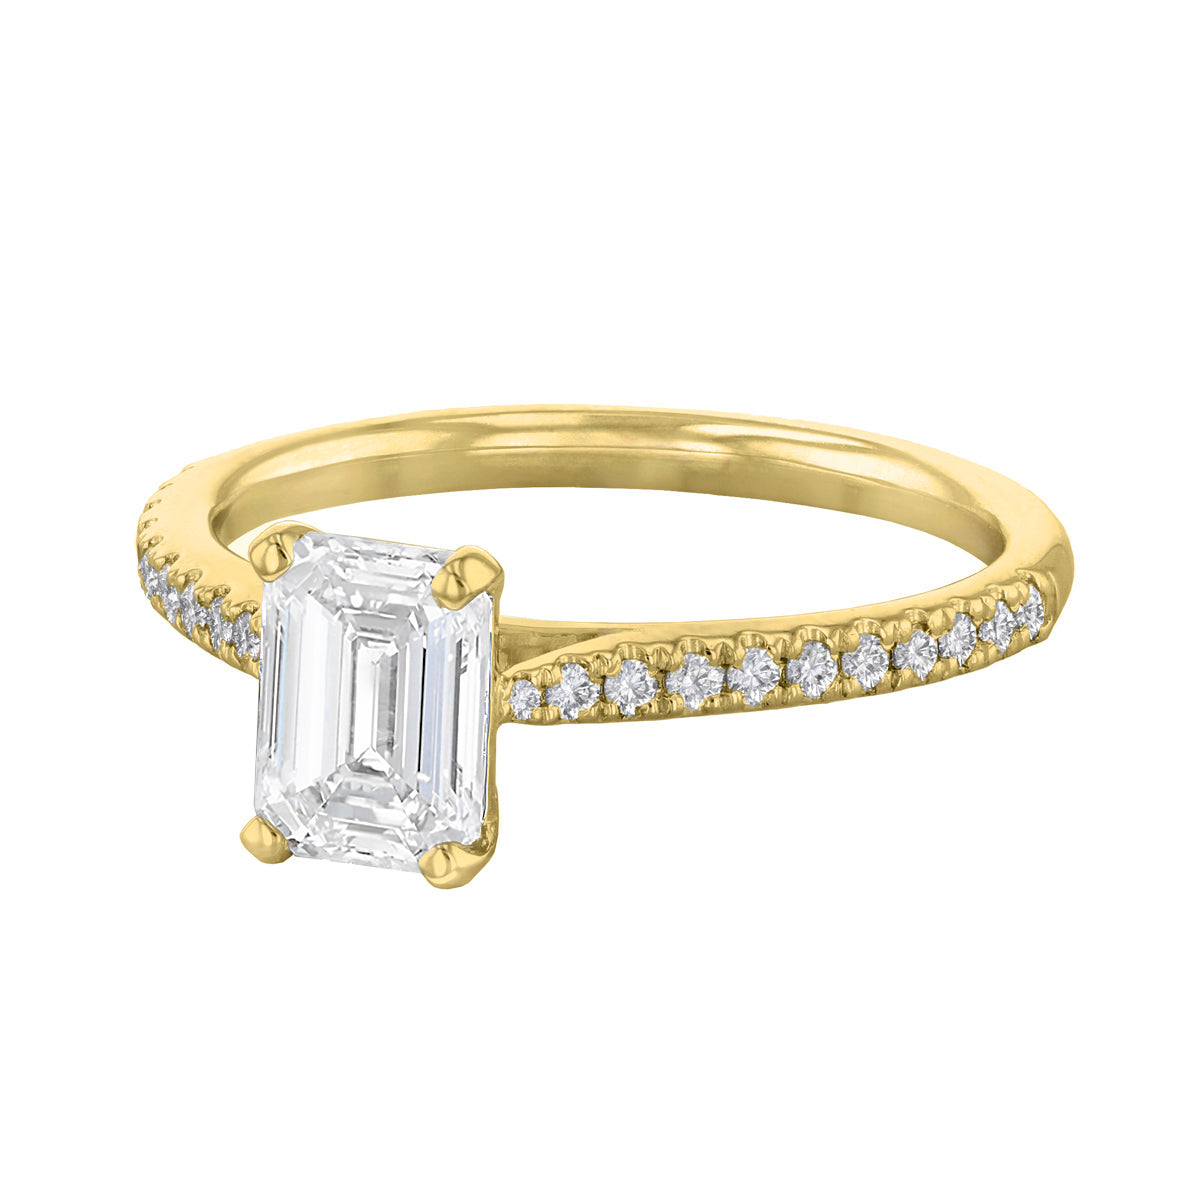 0-25ct-ophelia-shoulder-set-emerald-cut-solitaire-diamond-engagement-ring-18ct-yellow-gold